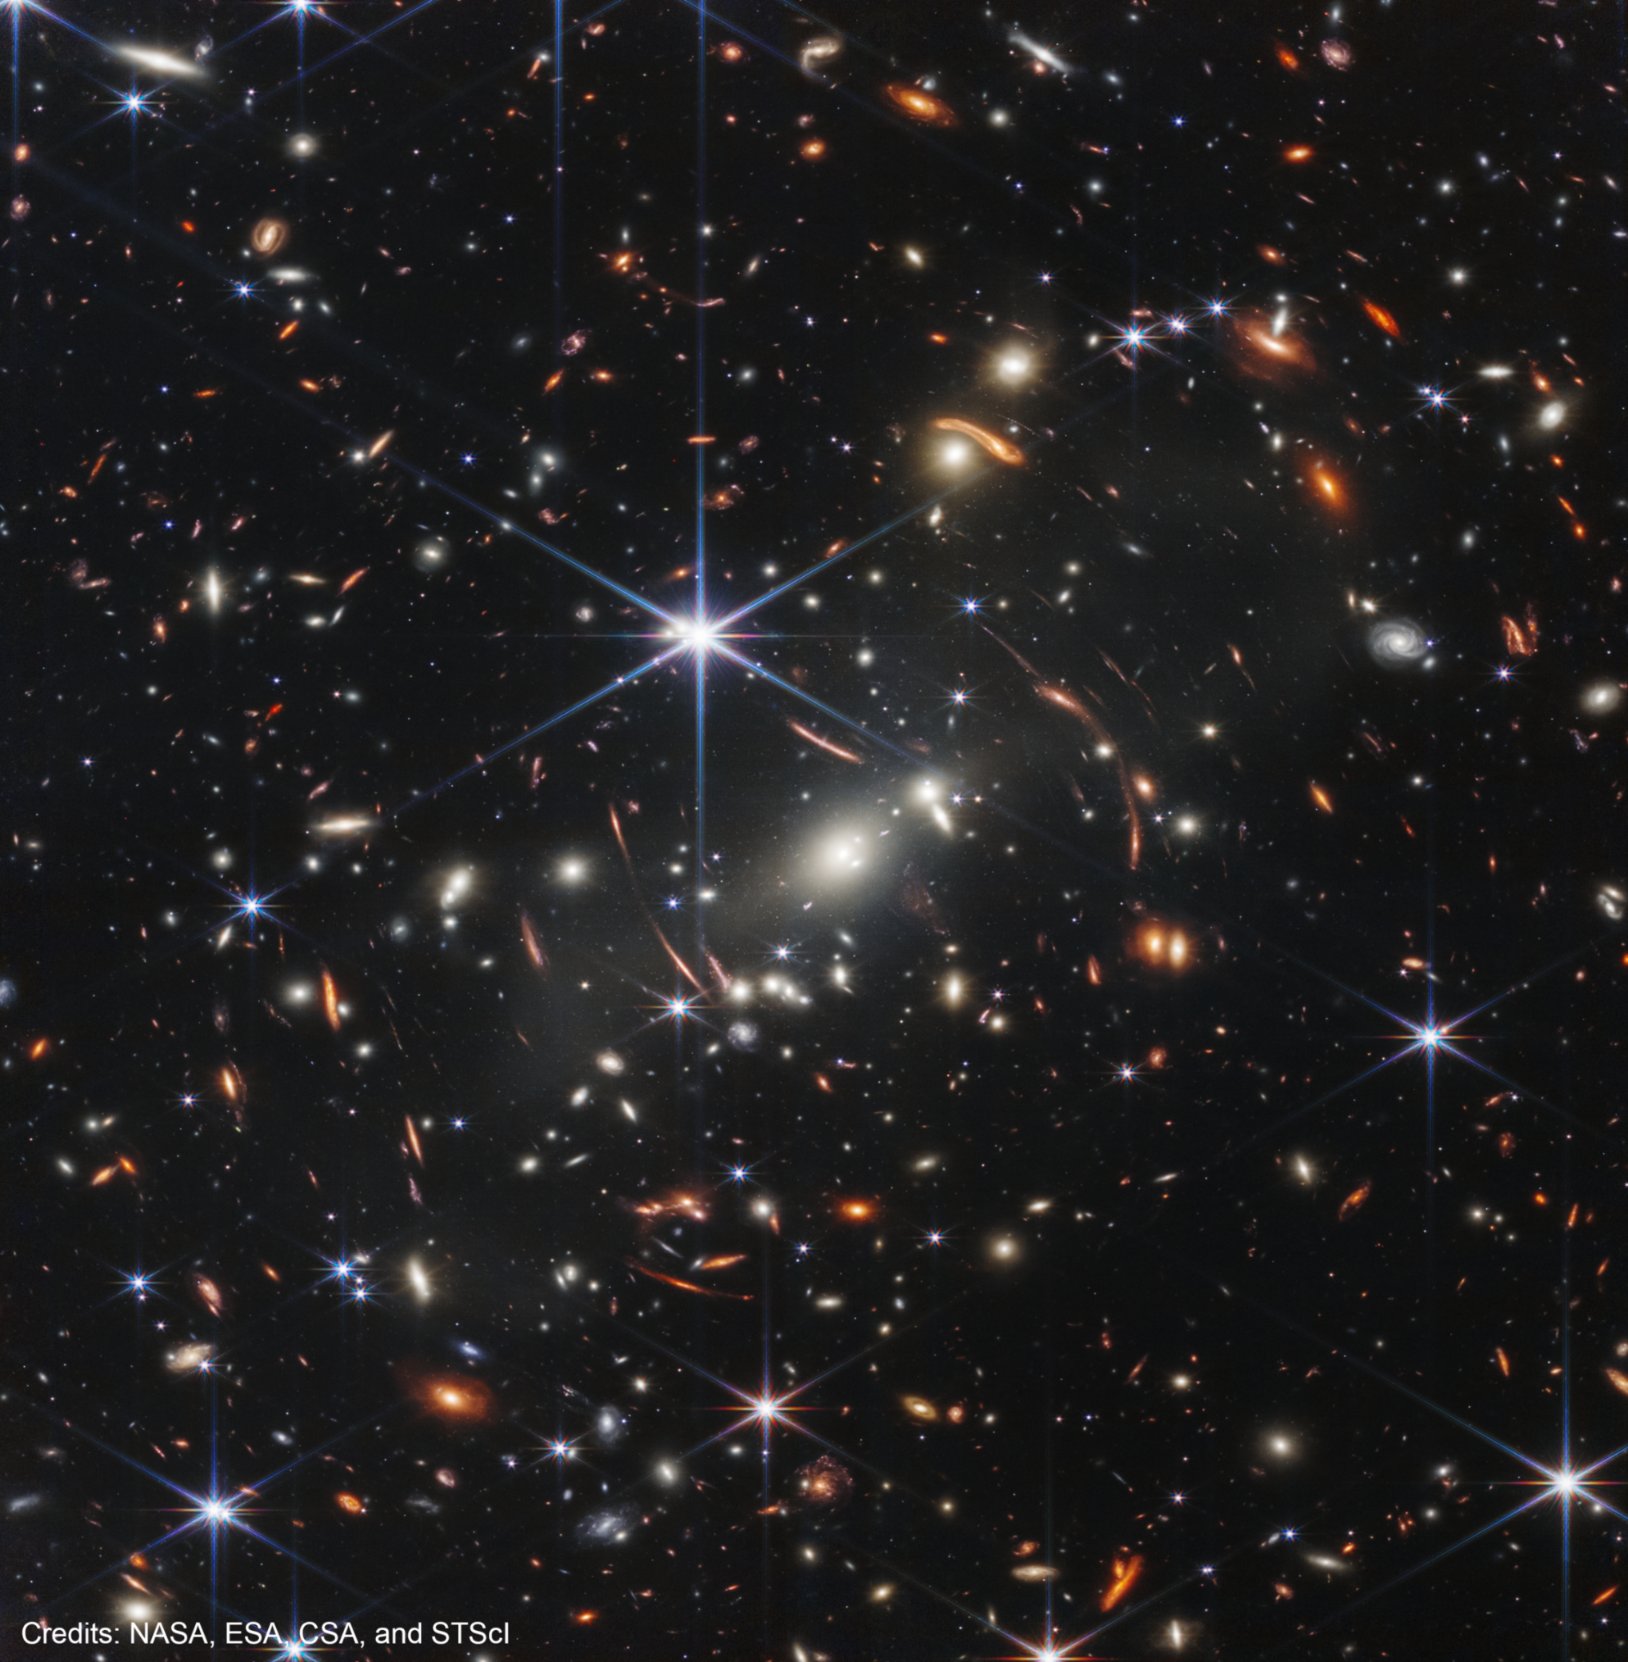 This image – the first released from NASA’s James Webb Space Telescope – shows the galaxy cluster SMACS 0723. Some of the galaxies appear smeared or stretched due to a phenomenon called gravitational lensing. This effect can help scientists map the presence of dark matter in the universe.
Credit: NASA, ESA, CSA, STScI